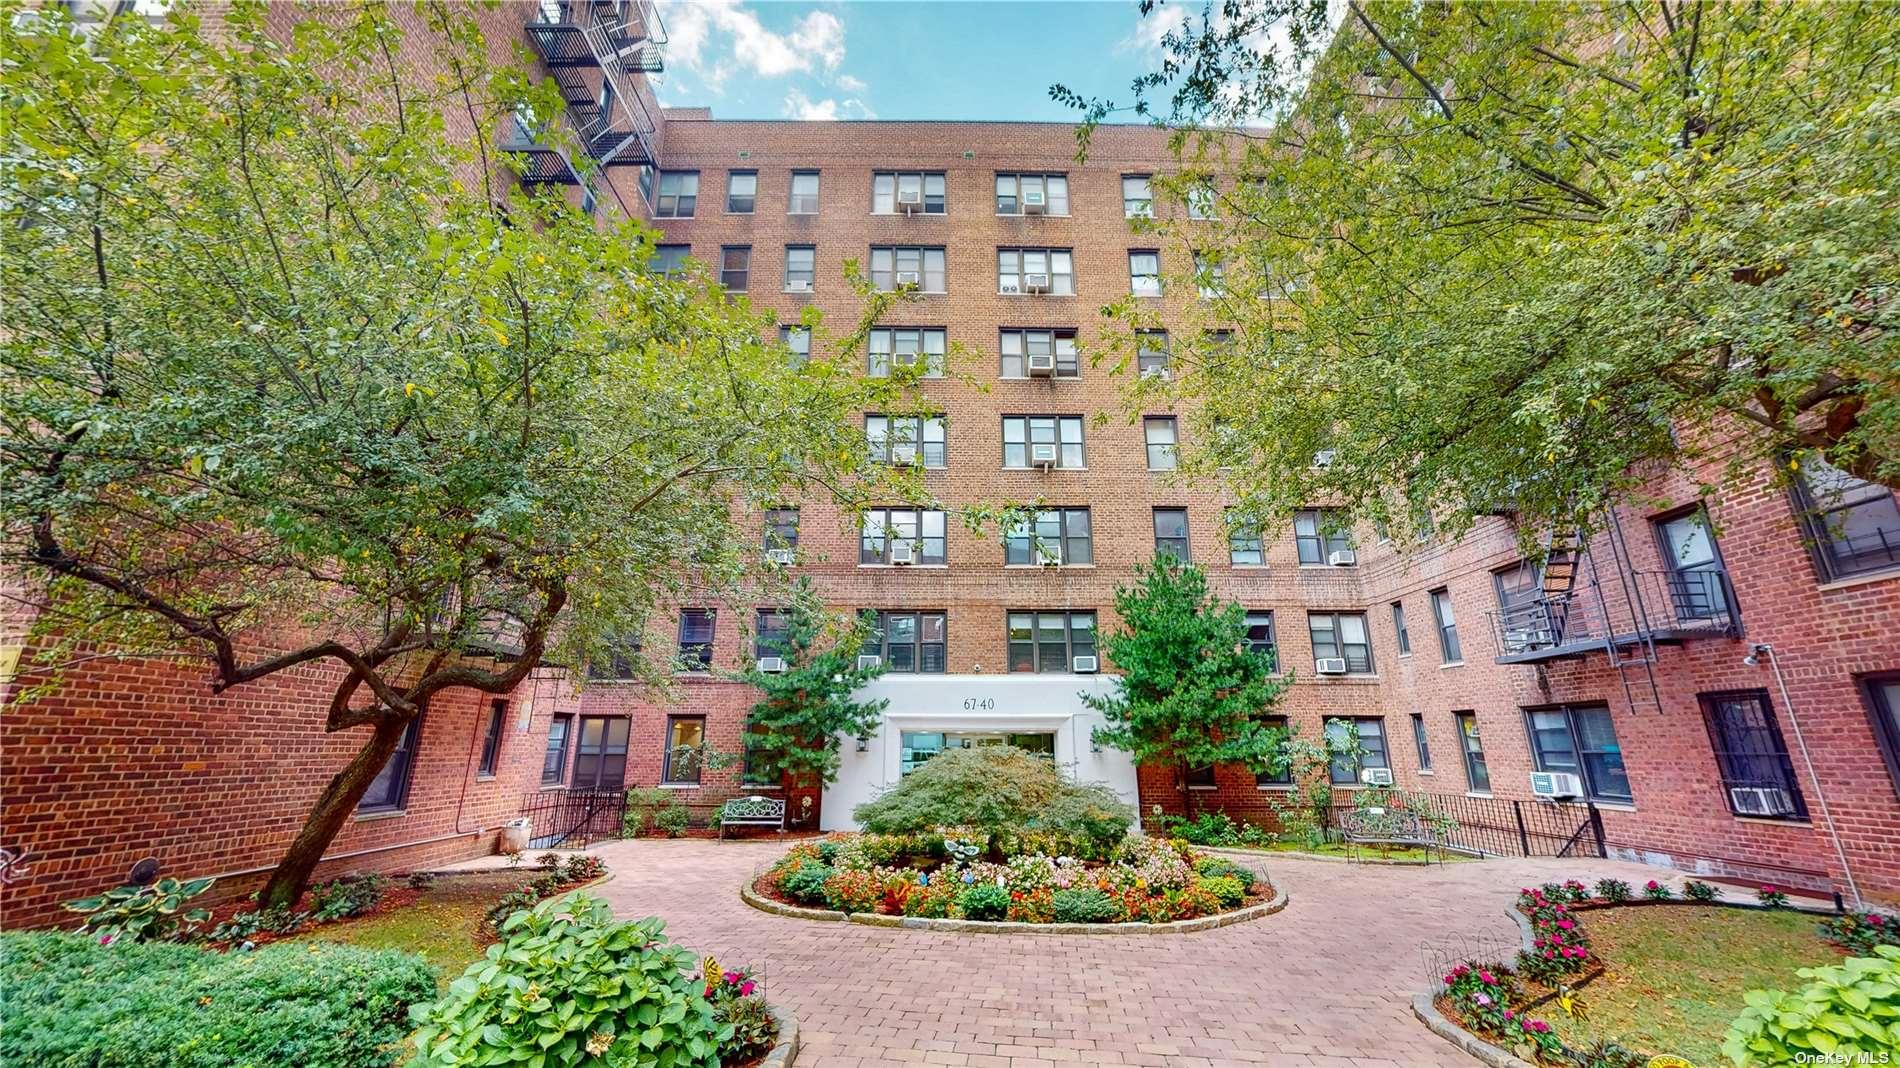 67-40 Yellowstone Boulevard #7A in Queens, Forest Hills, NY 11375